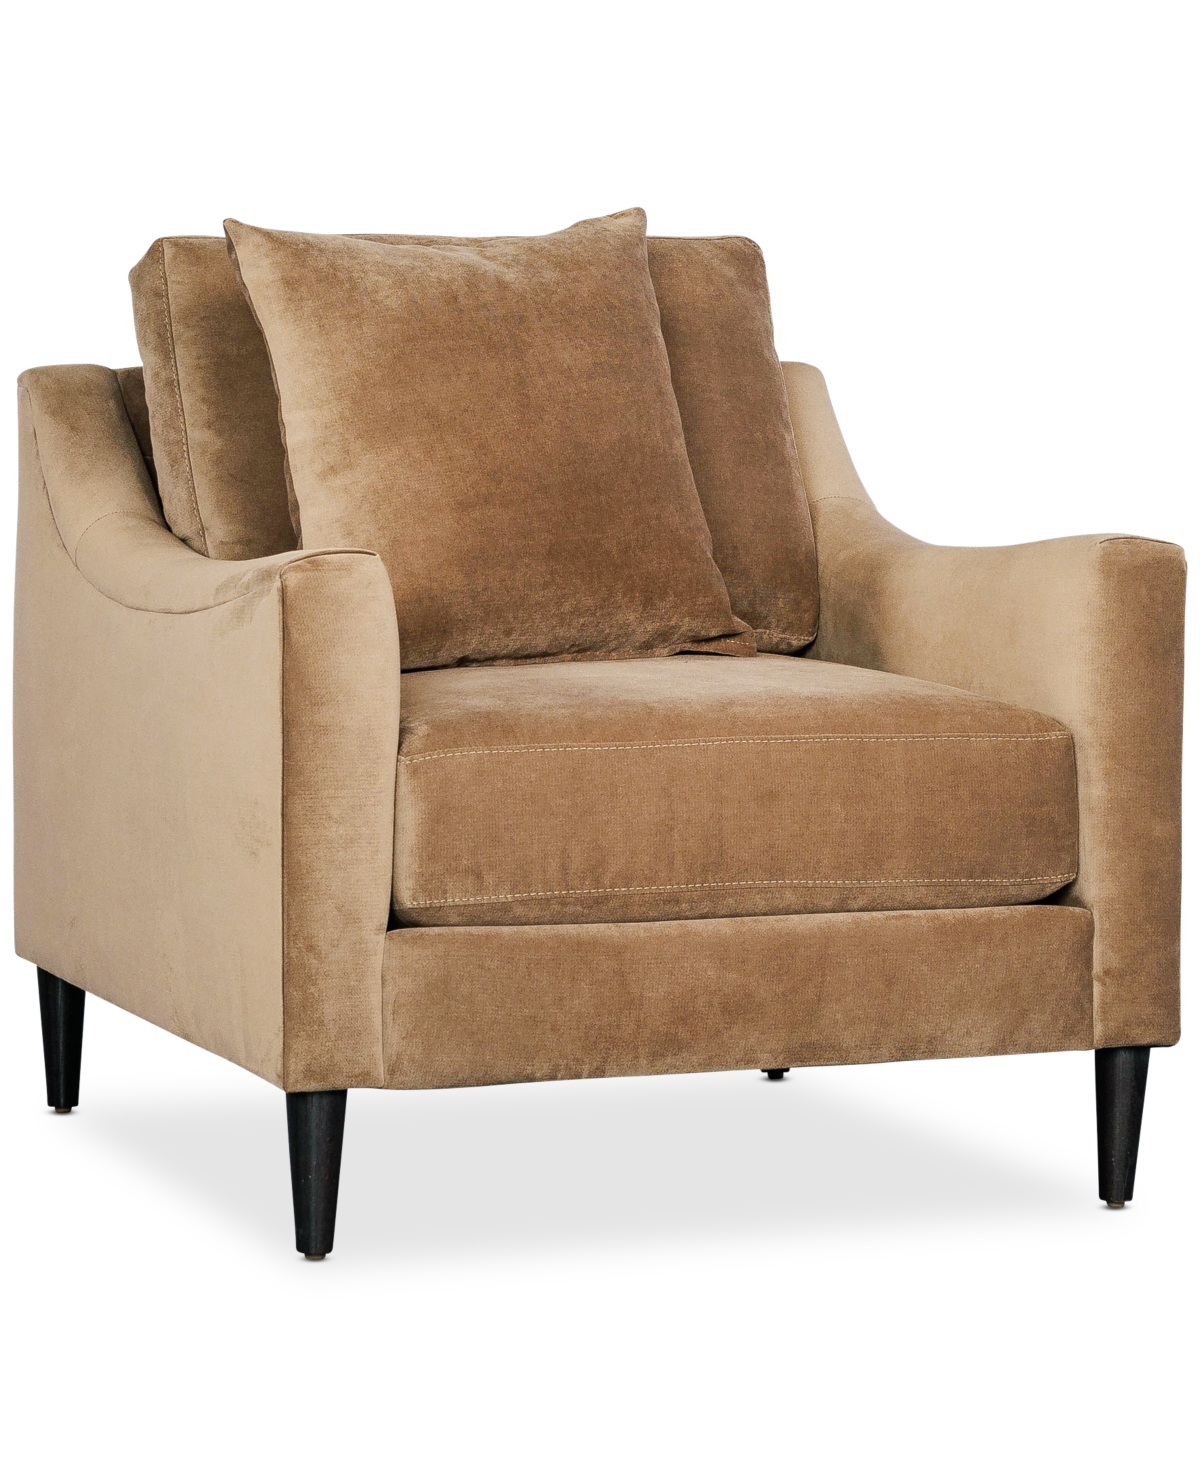 Furniture Iliza 39" Fabric Arm Chair, Created For Macy's In Taupe